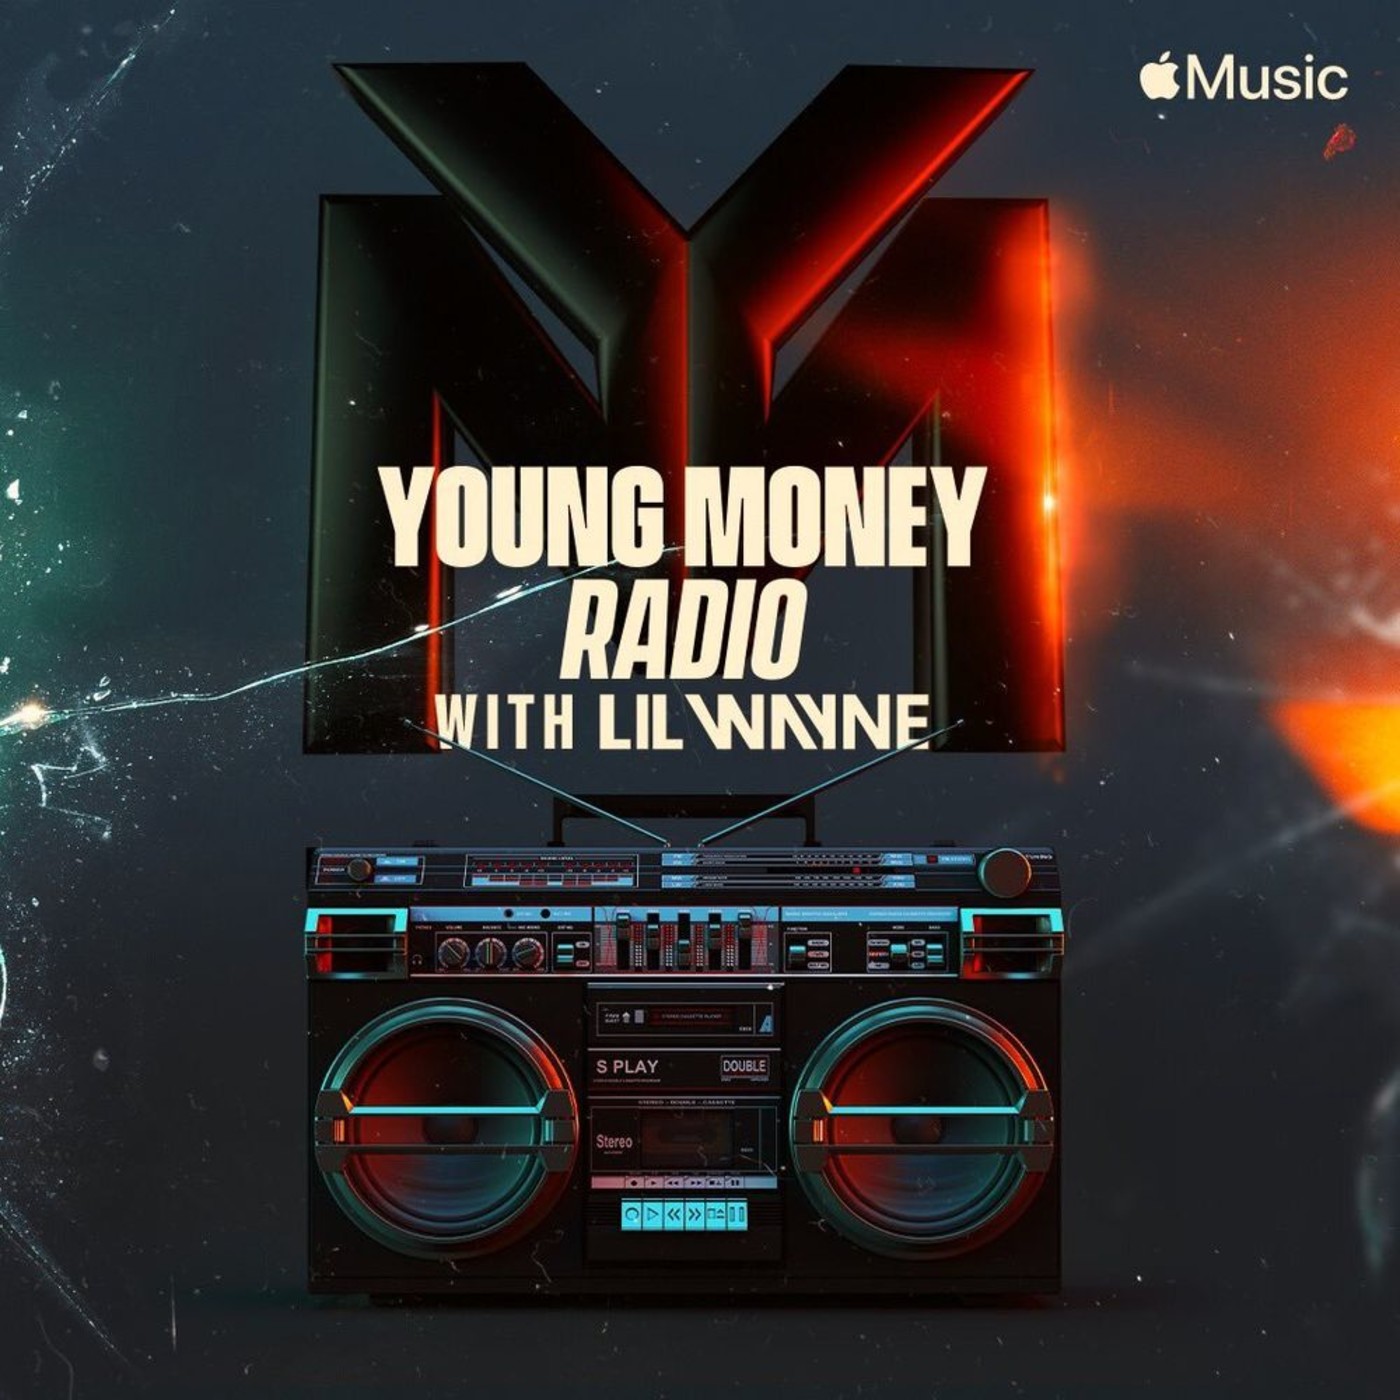 Listen to Episode 1 of Lil Wayne's Young Money Radio